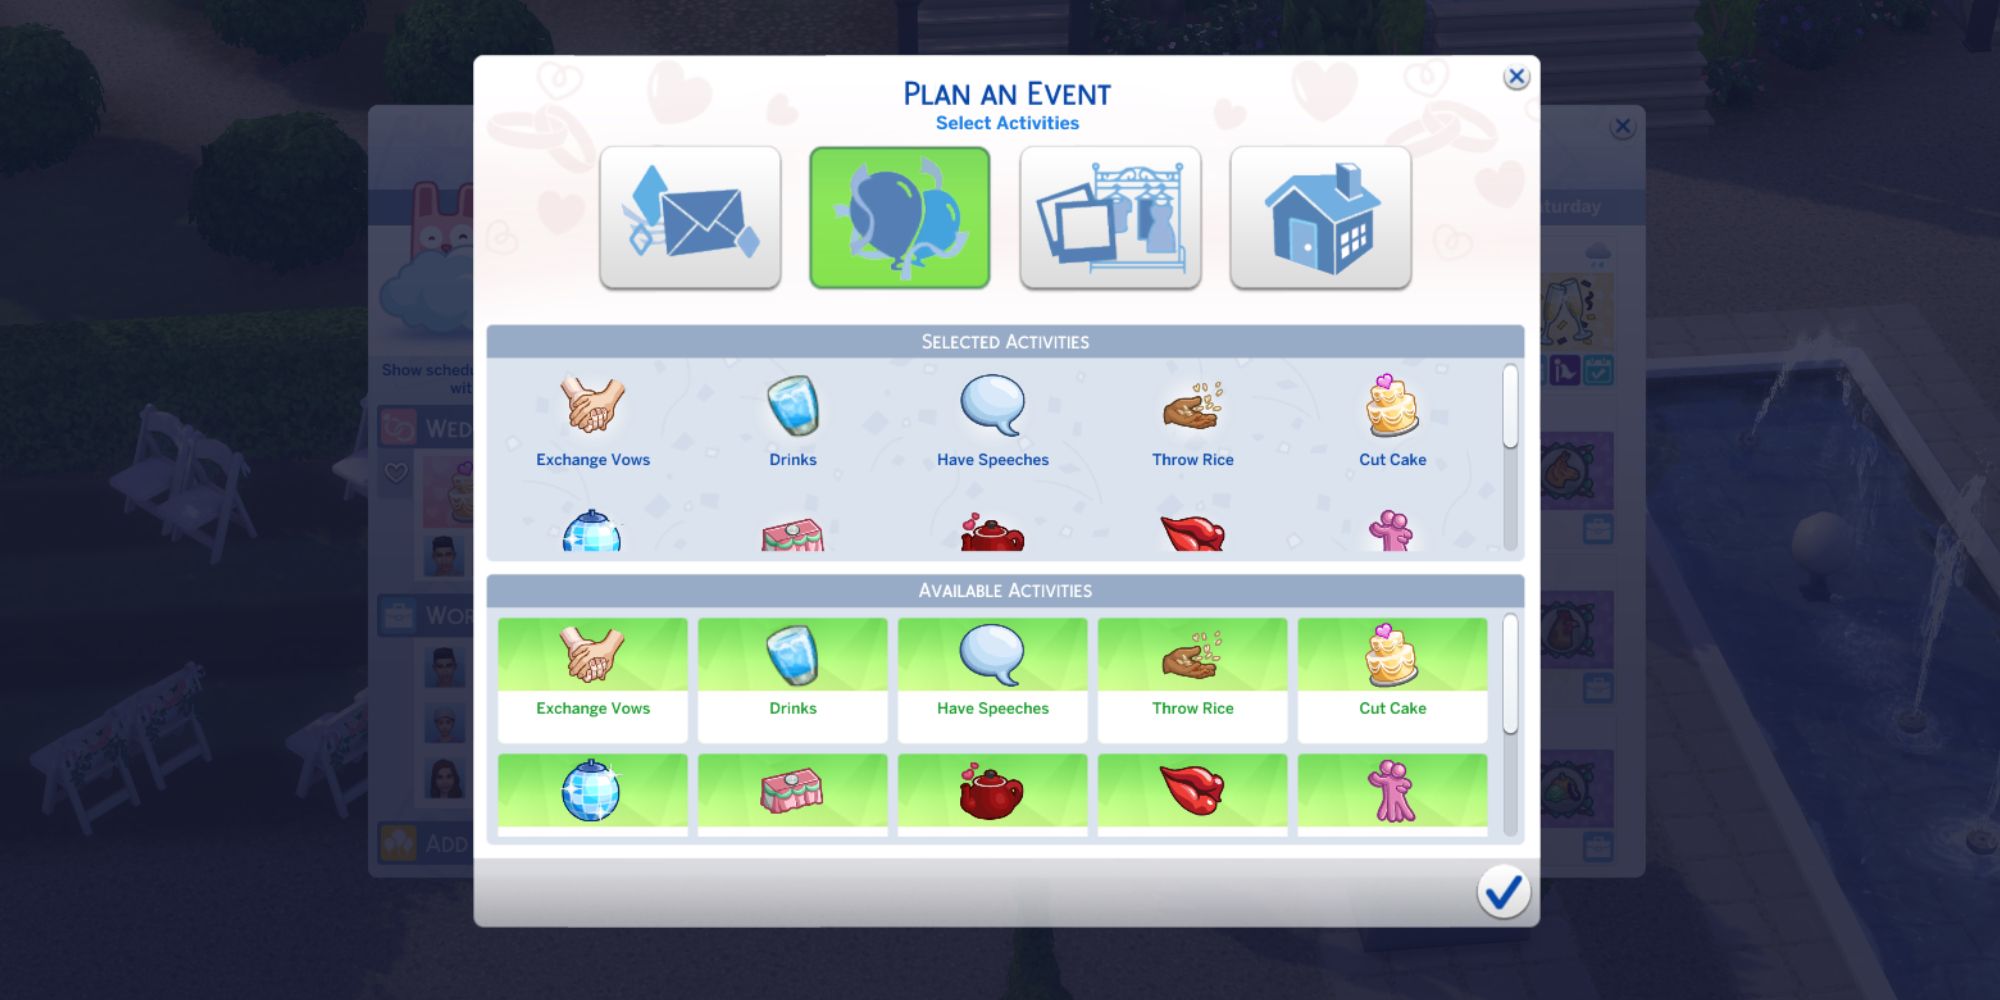 Sims 4 wedding activities list for ceremony